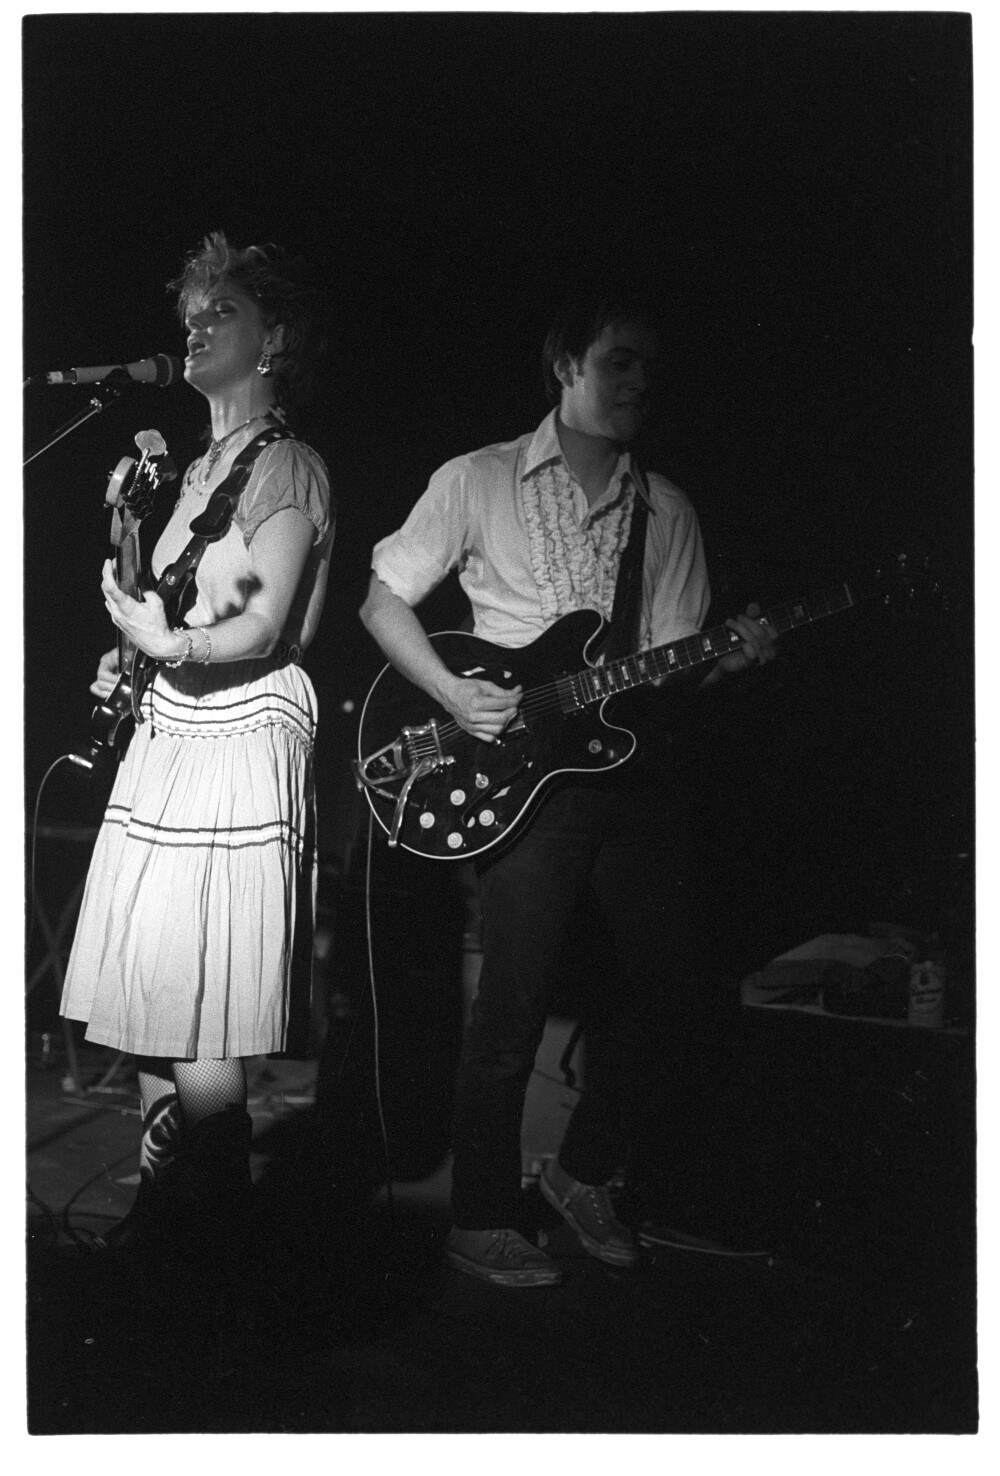 Trigger and the Thrill Kings 15.06.1984 I N 7 (Rita Maier / Schwules Museum Berlin RR-P)